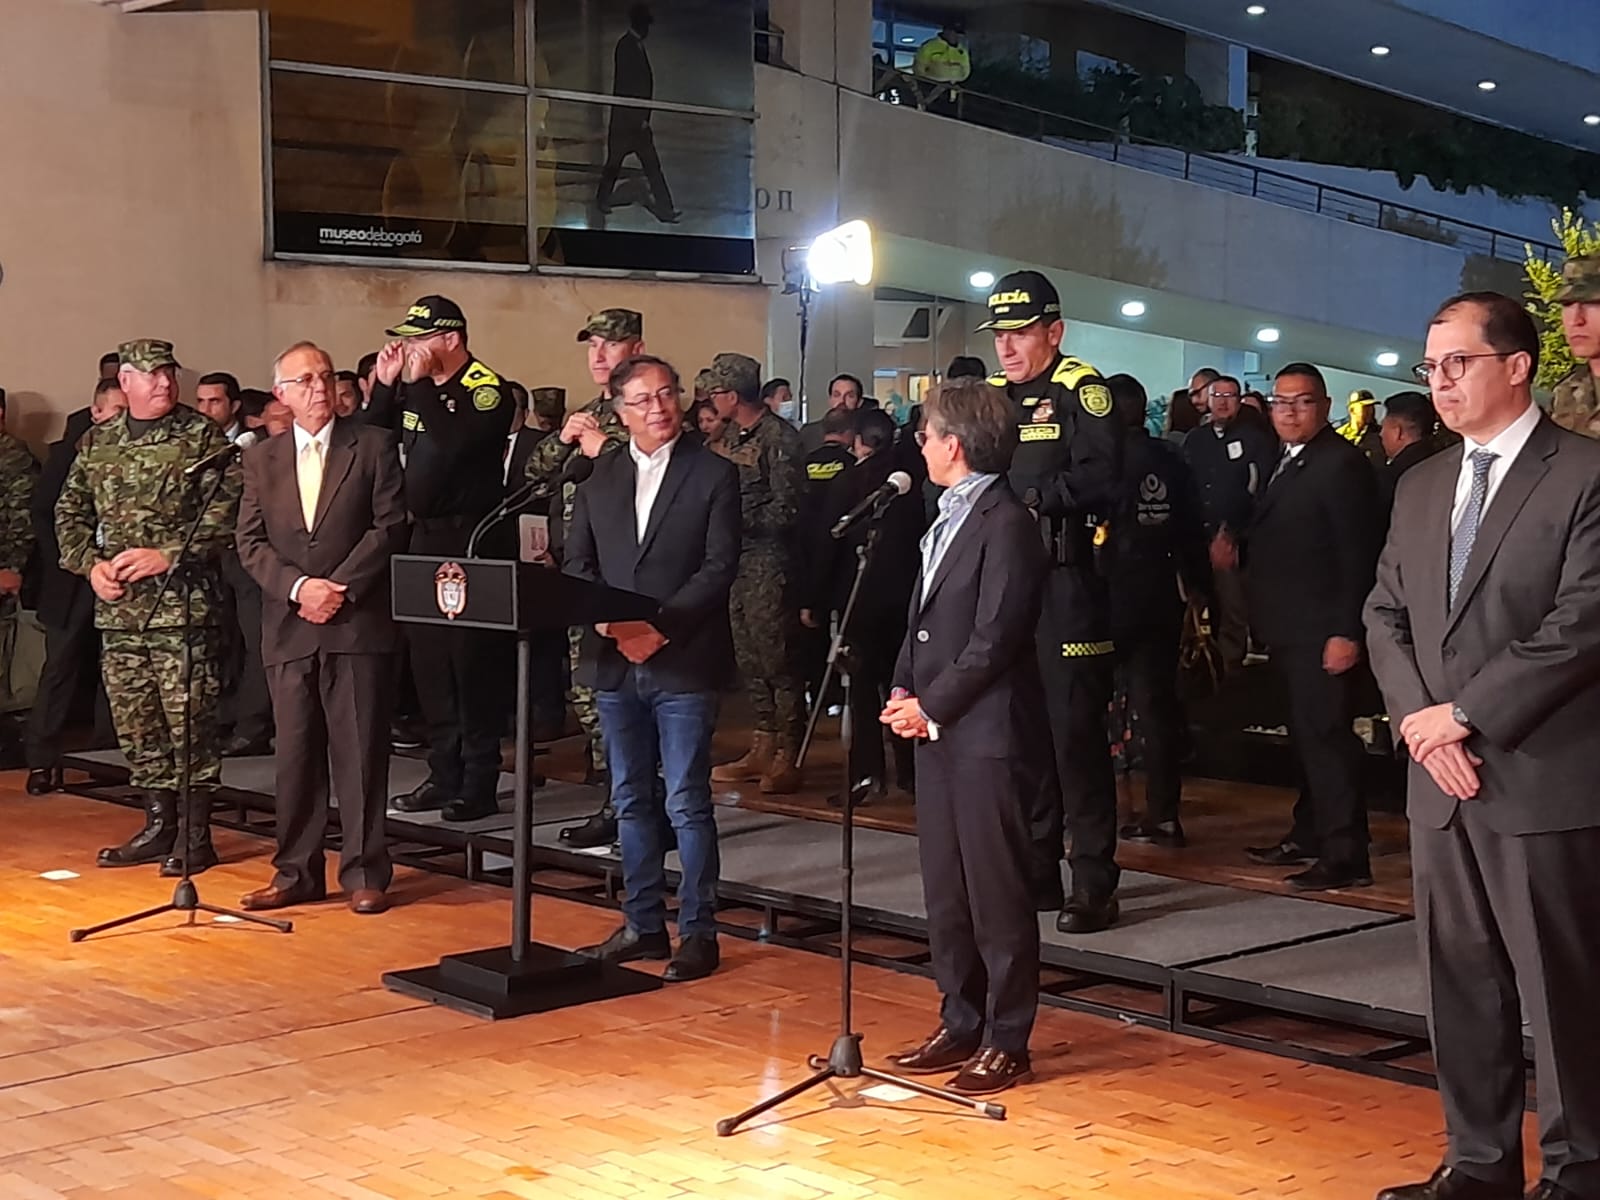 Mayor's Office and Government announce new approach to improve security in Bogotá